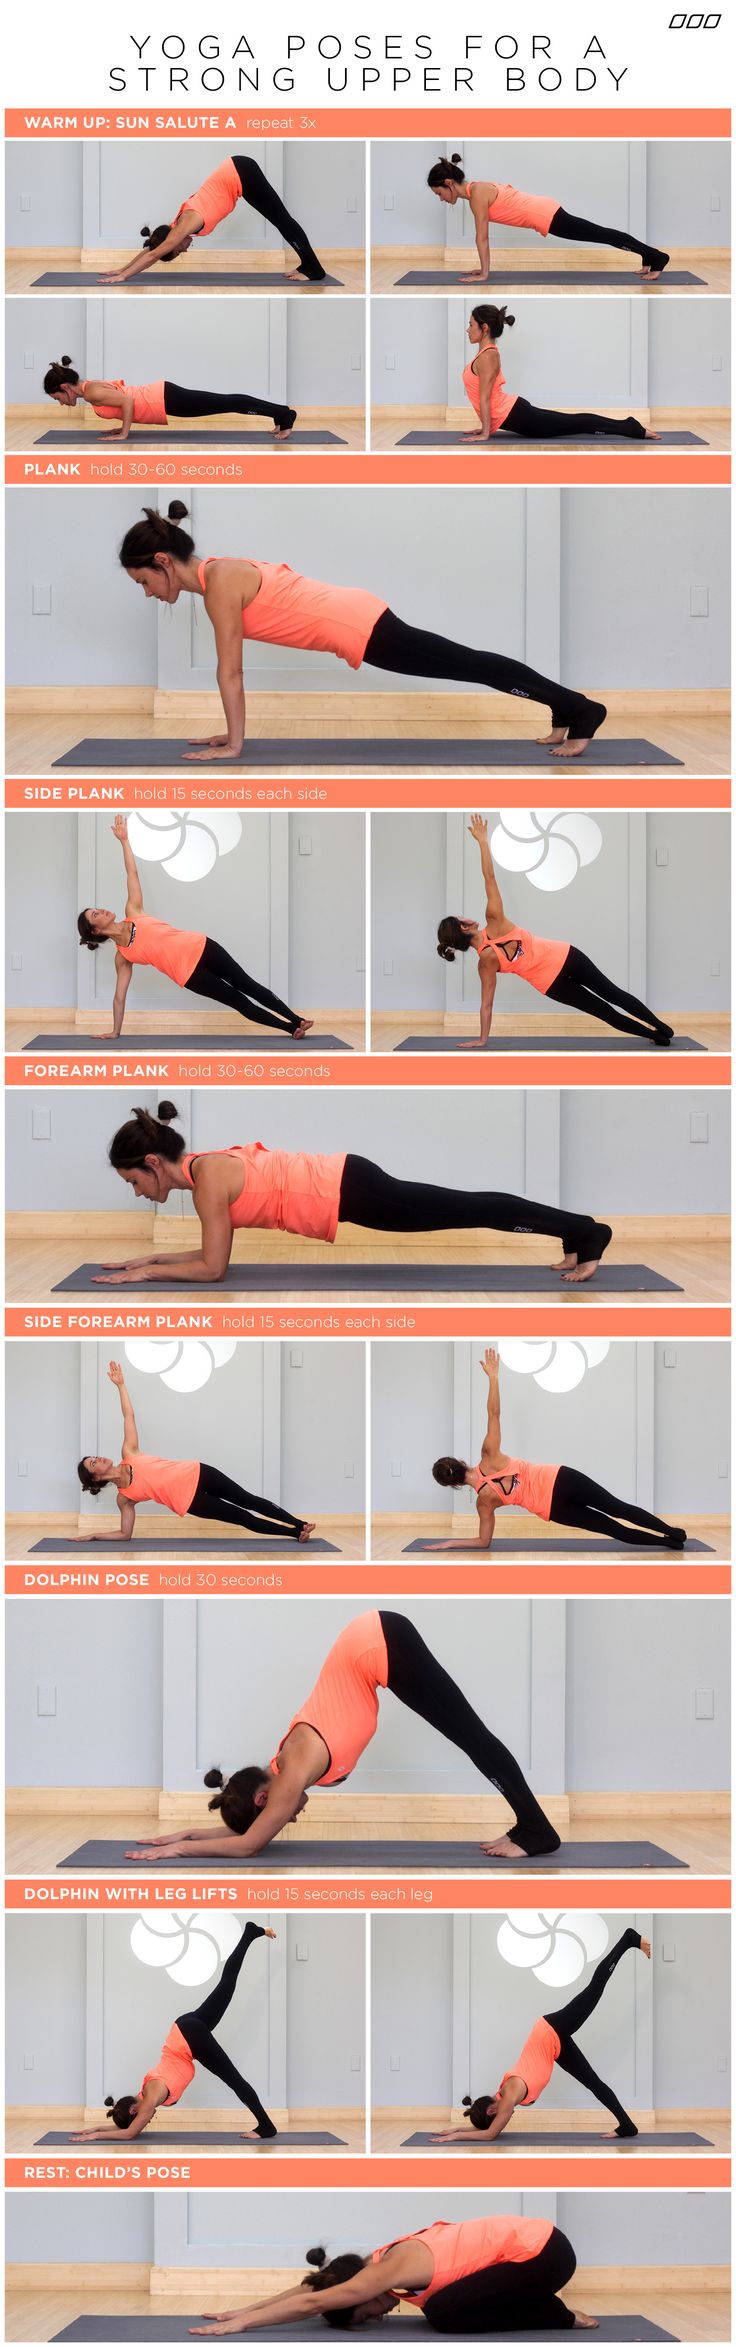 Yoga Poses For A Strong Upper Body .......... Looking to strengthen and tone you...